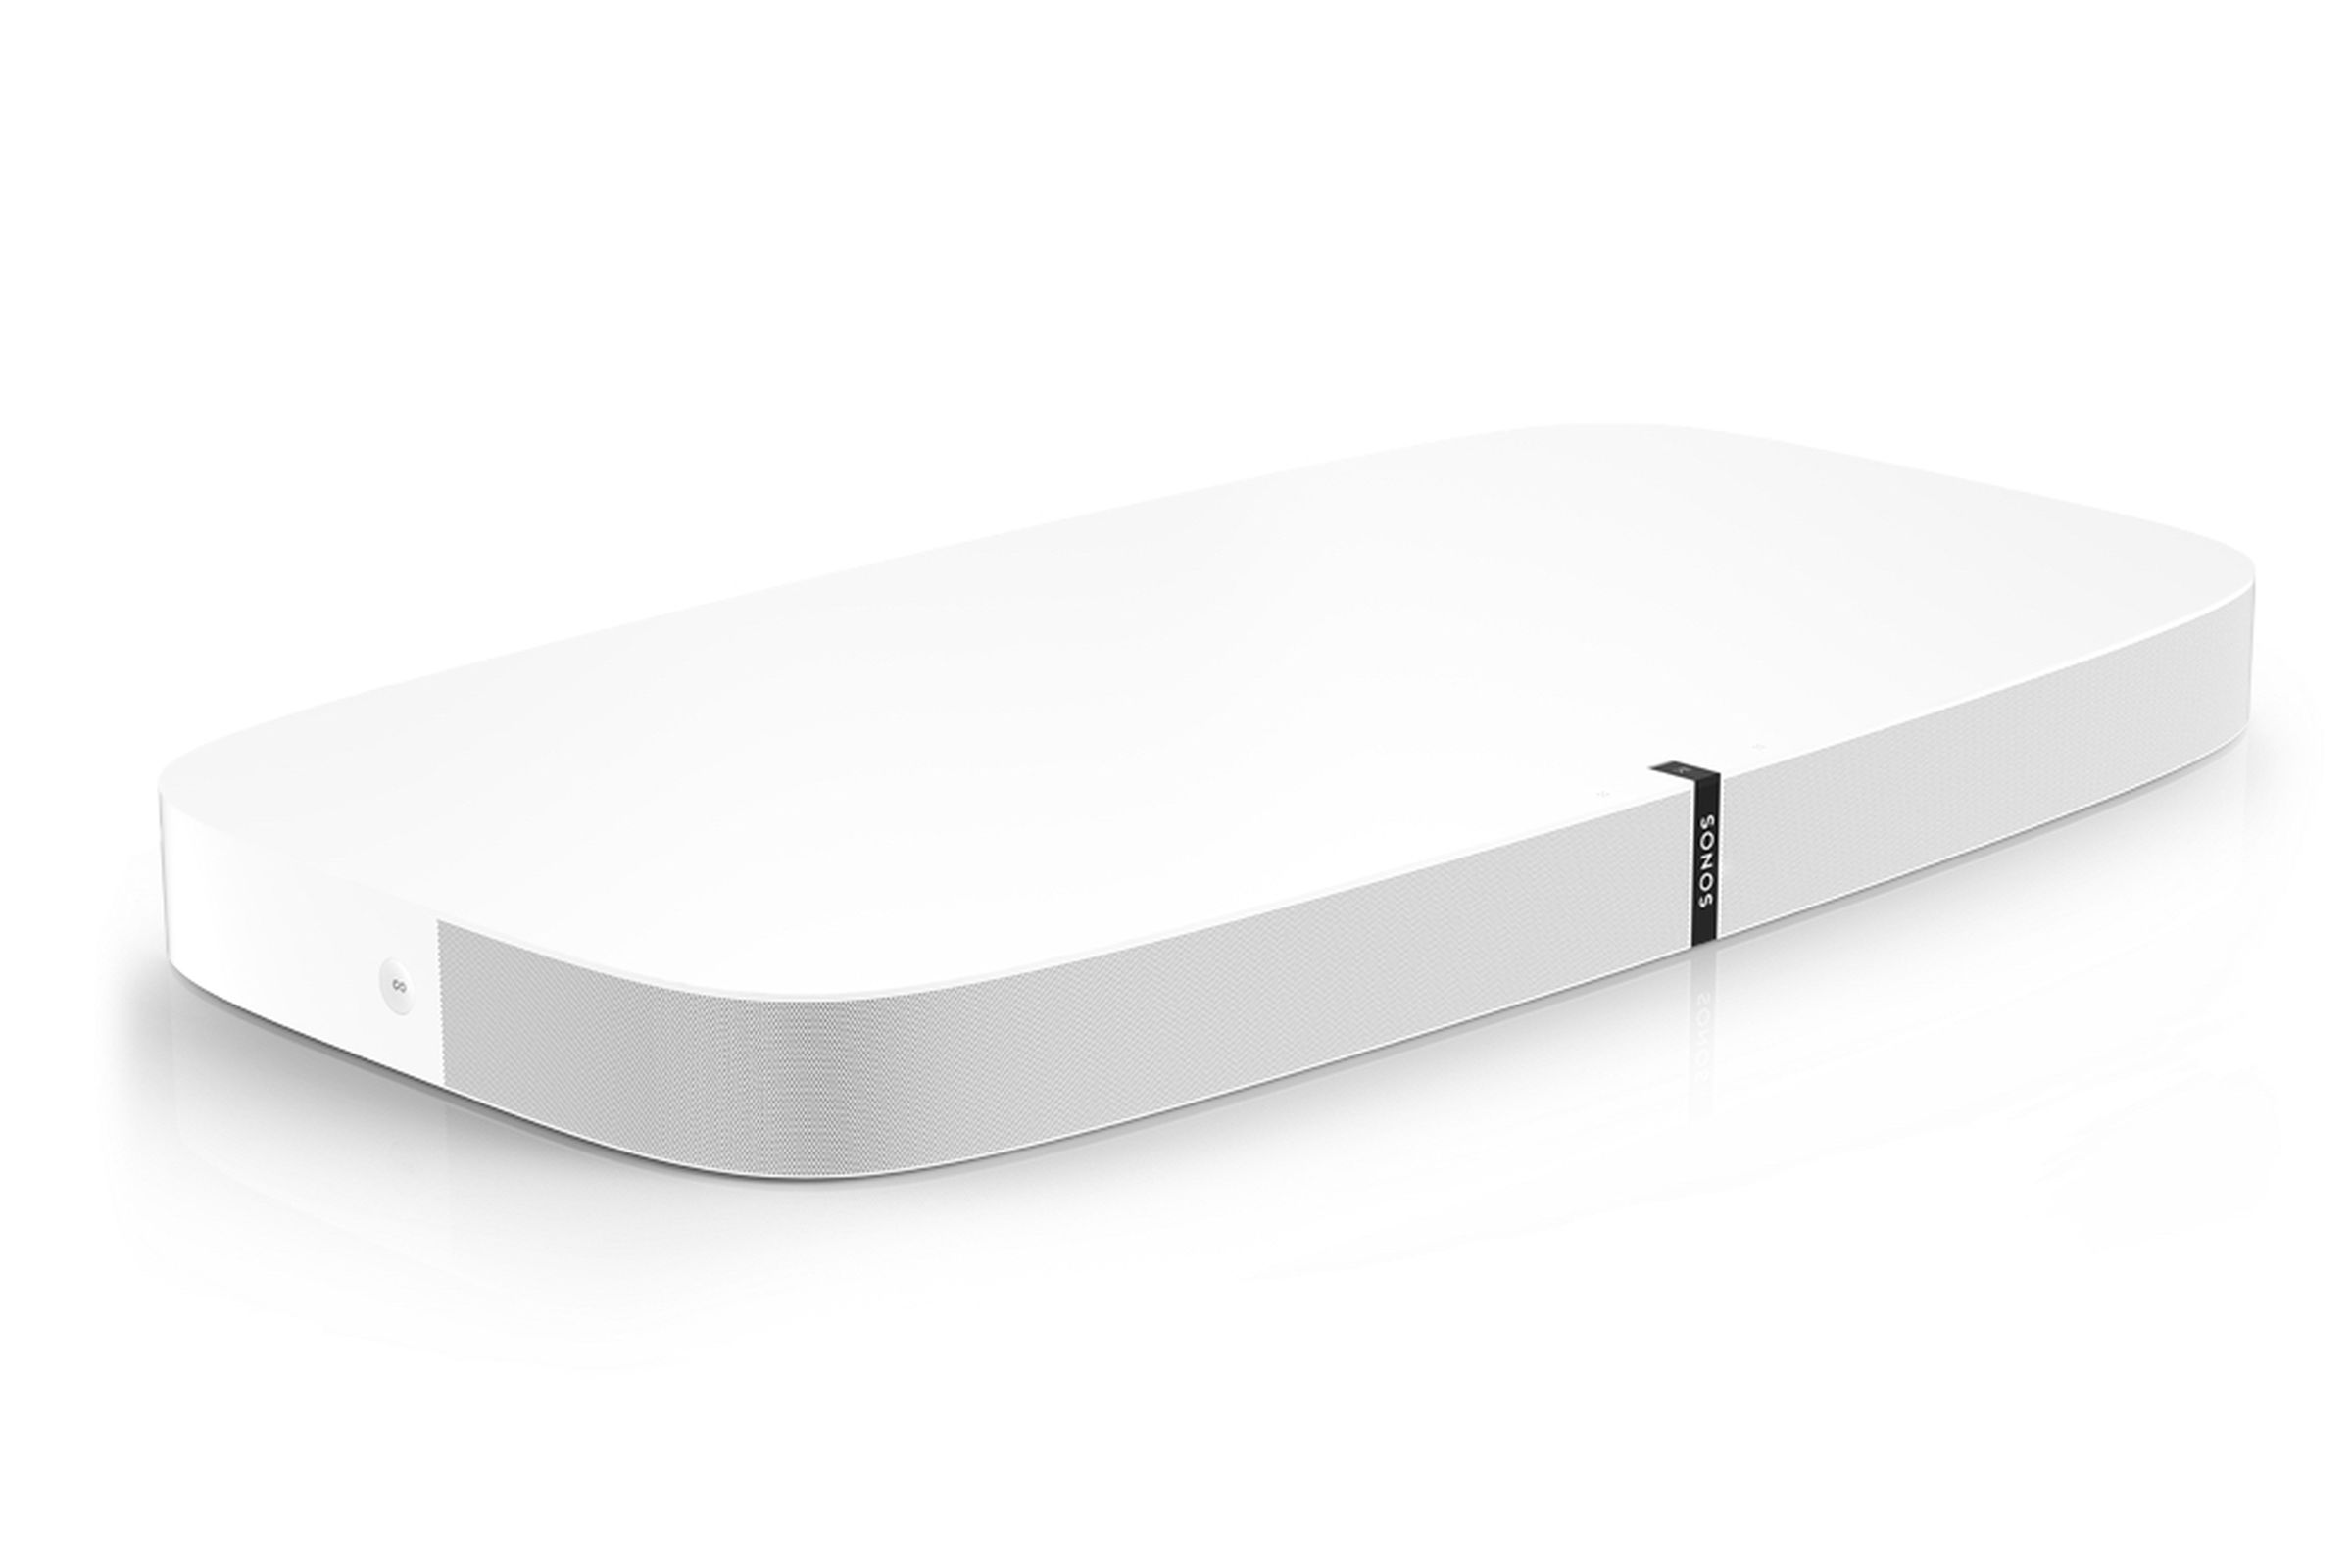 A leaked image of the Sonos PlayBase.